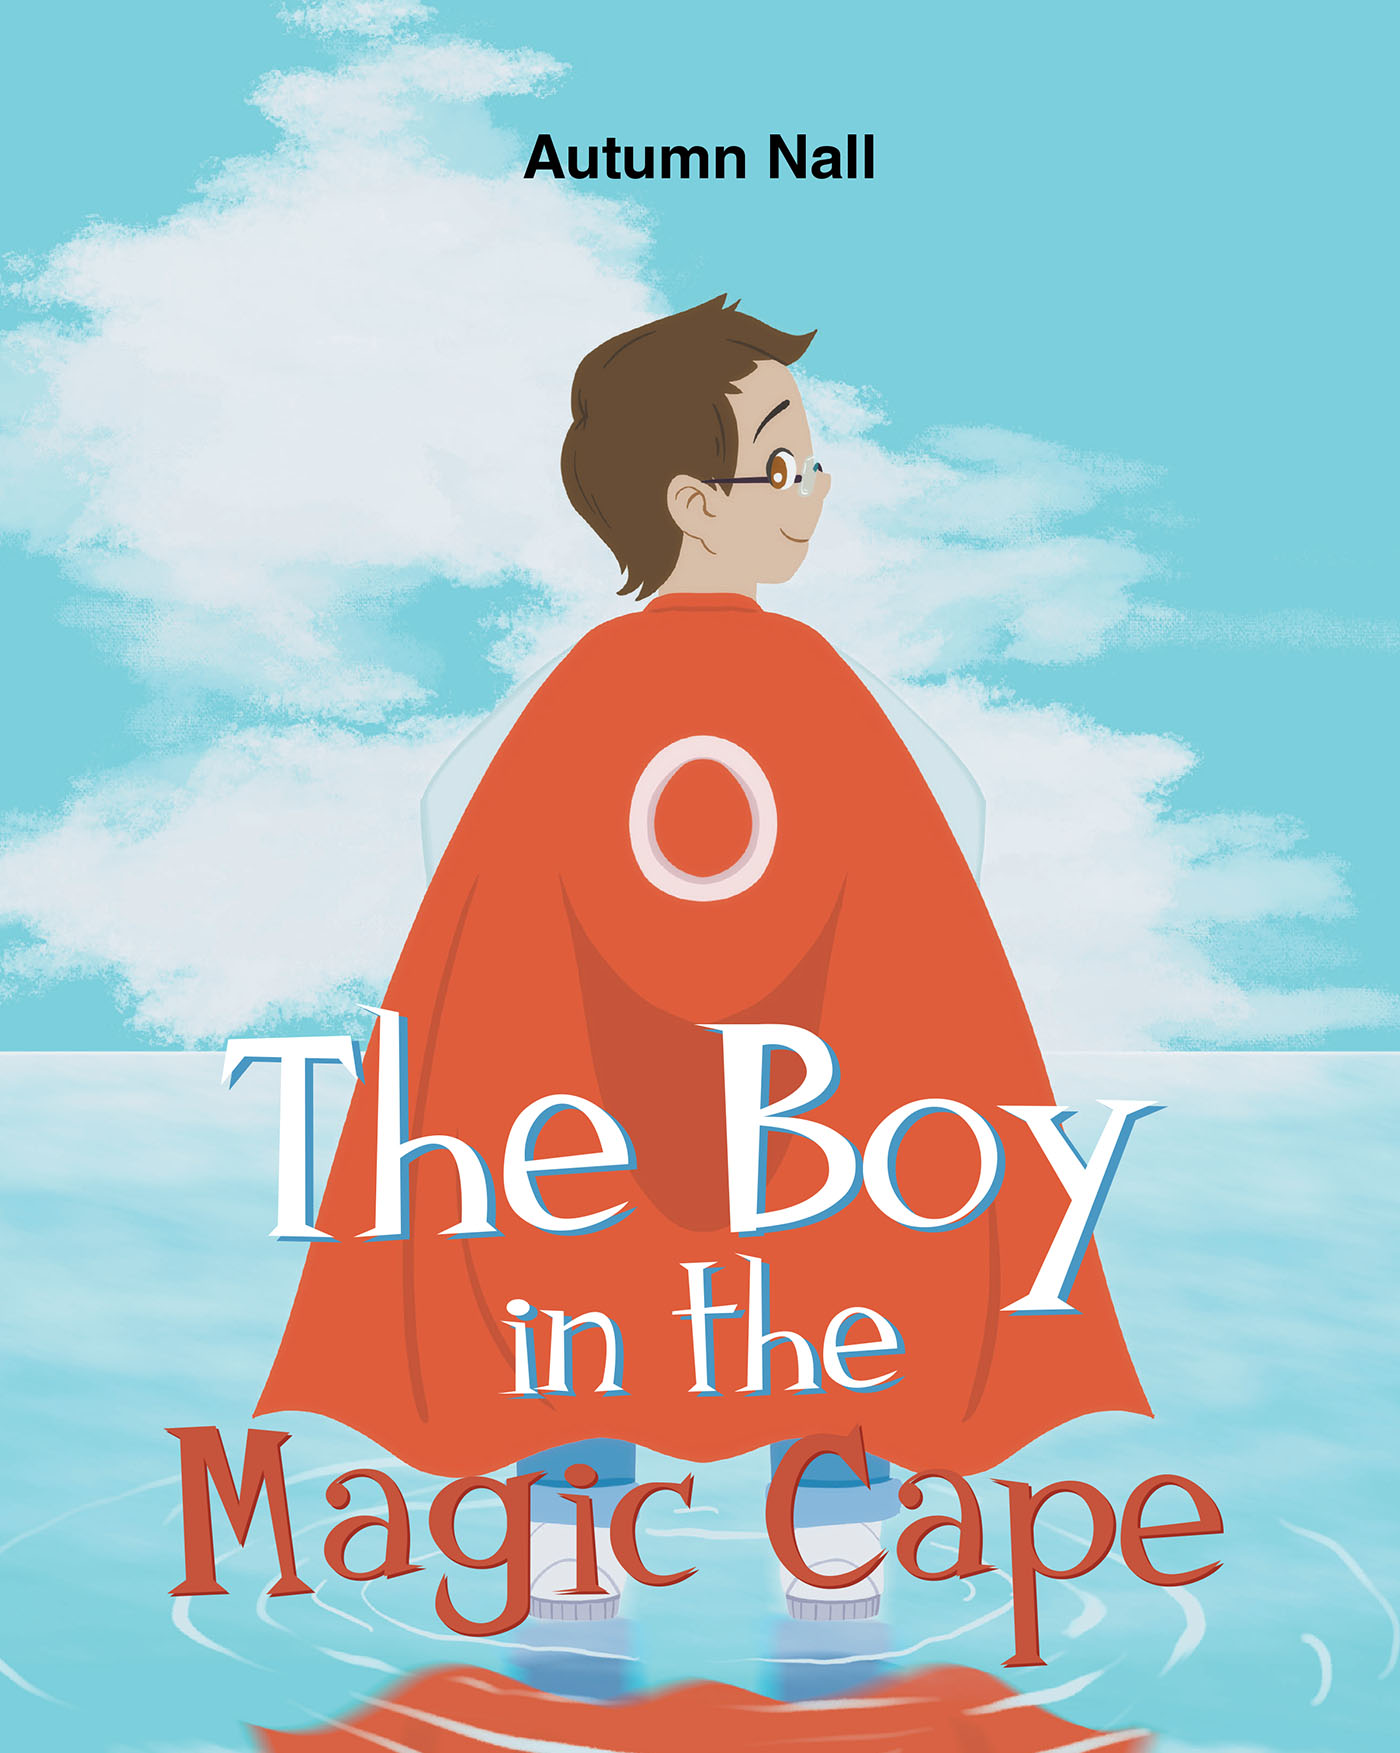 Autumn Nall’s Newly Released “The Boy in the Magic Cape” is a Heartfelt Acknowledgement of the Need for More Mental Health Awareness for Children